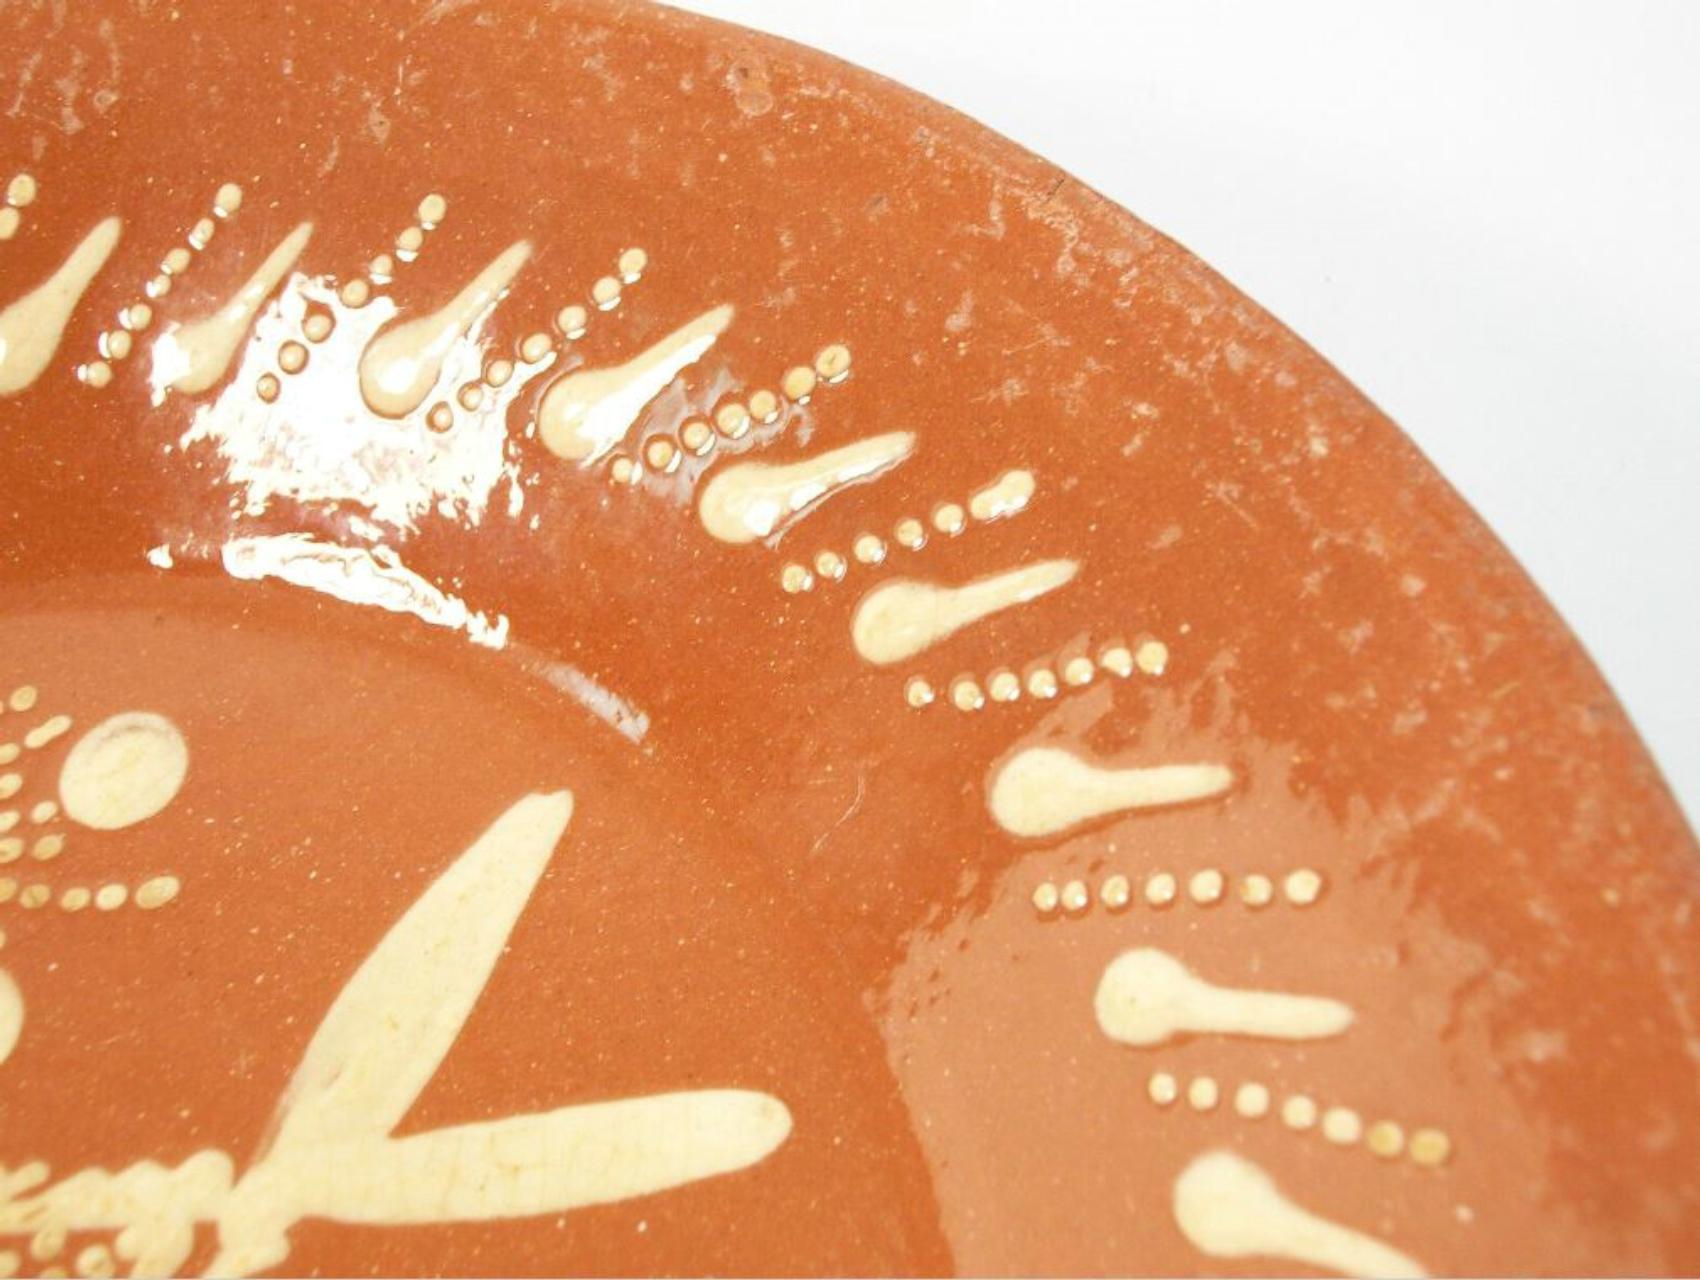 Vintage Continental Terracotta Slipware Decorated Dish, Signed, 20th Century For Sale 1